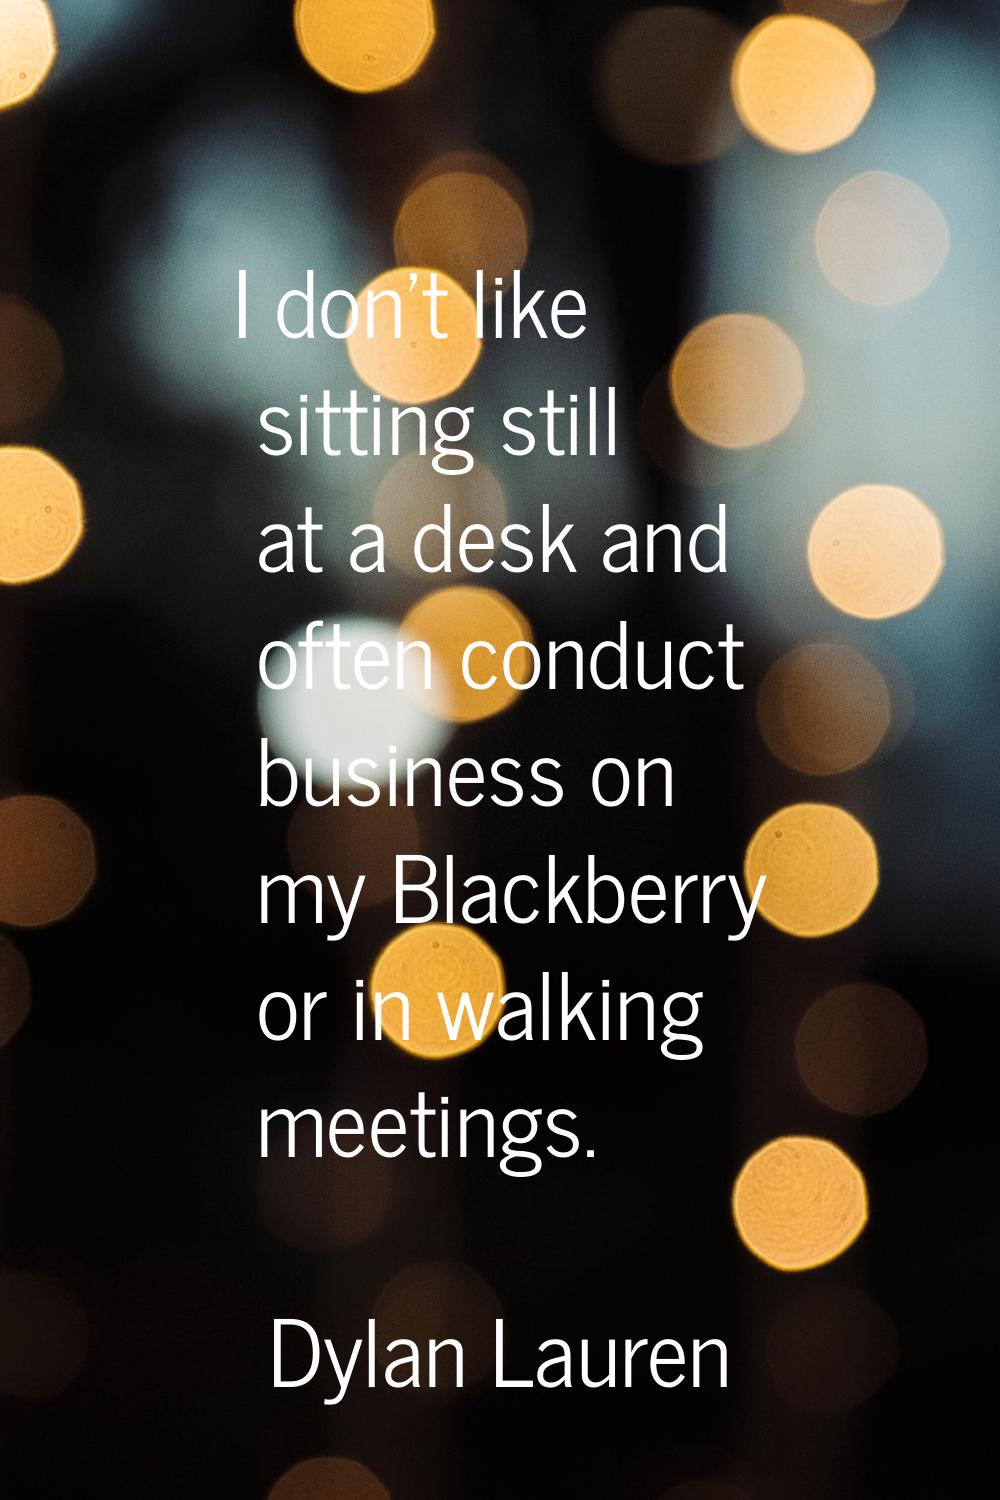 I don't like sitting still at a desk and often conduct business on my Blackberry or in walking meet